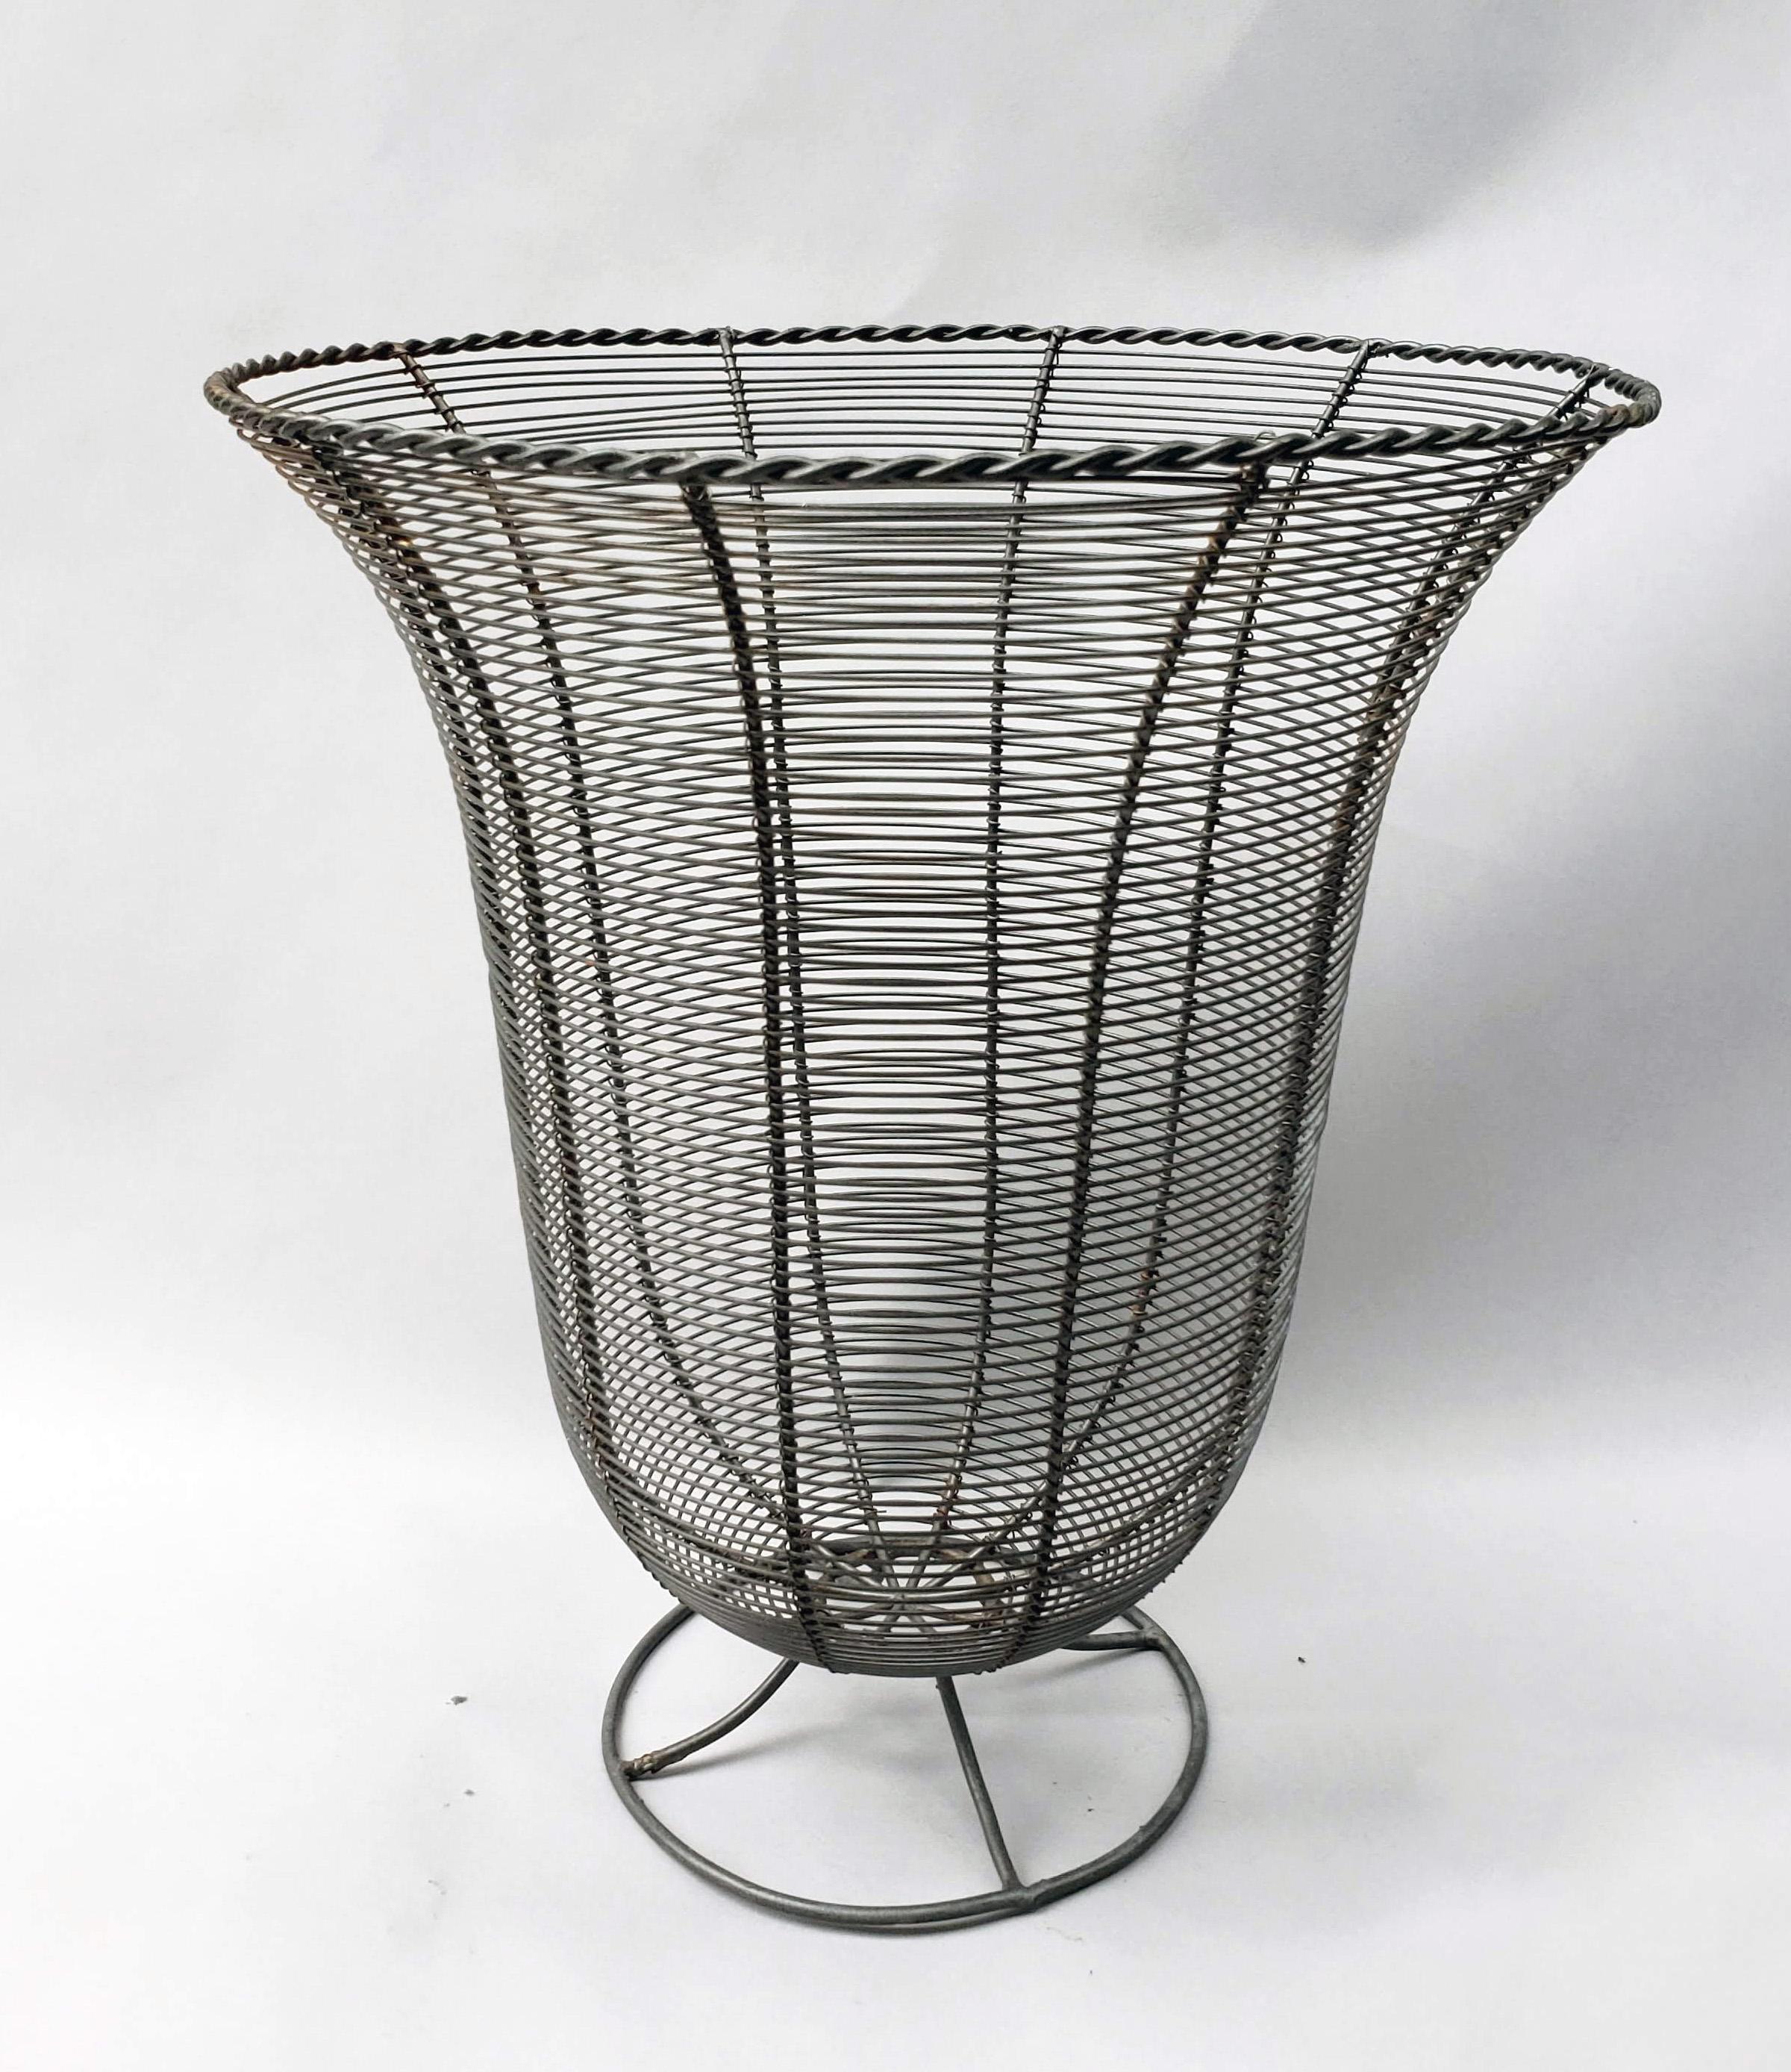 American Craftsman Midcentury 1940s American Wire Waste Basket For Sale